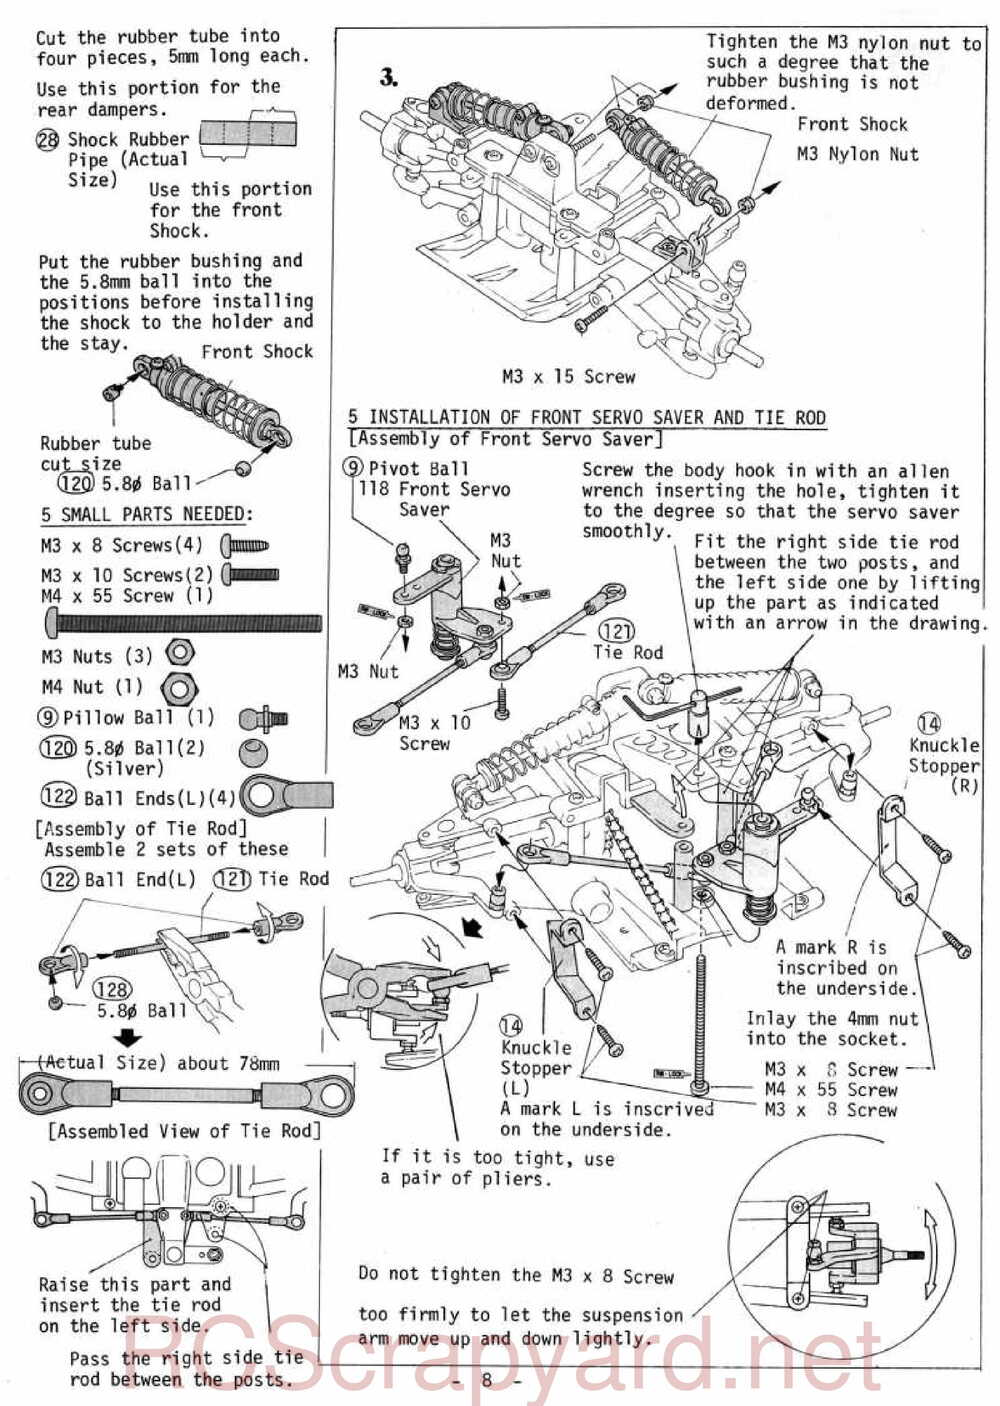 Kyosho - 3069 - Gallop MkII - Manual - Page 08